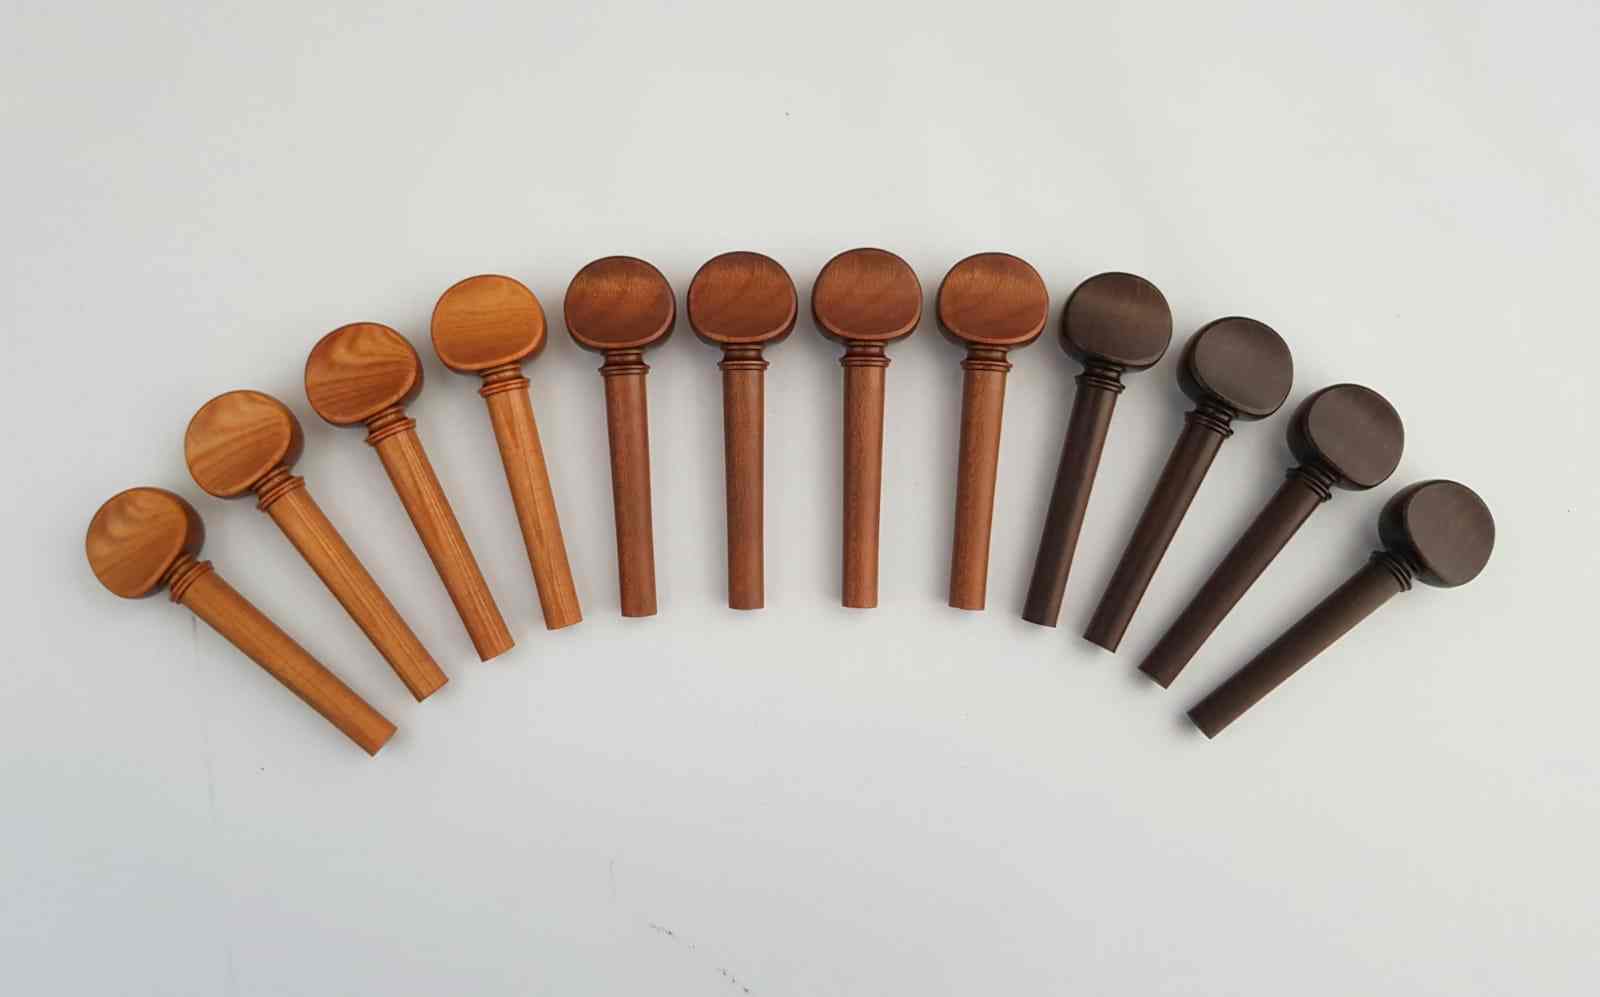 Pegs from Sonowood spruce, maple and walnut made by Berdani Feinste Bestandteile